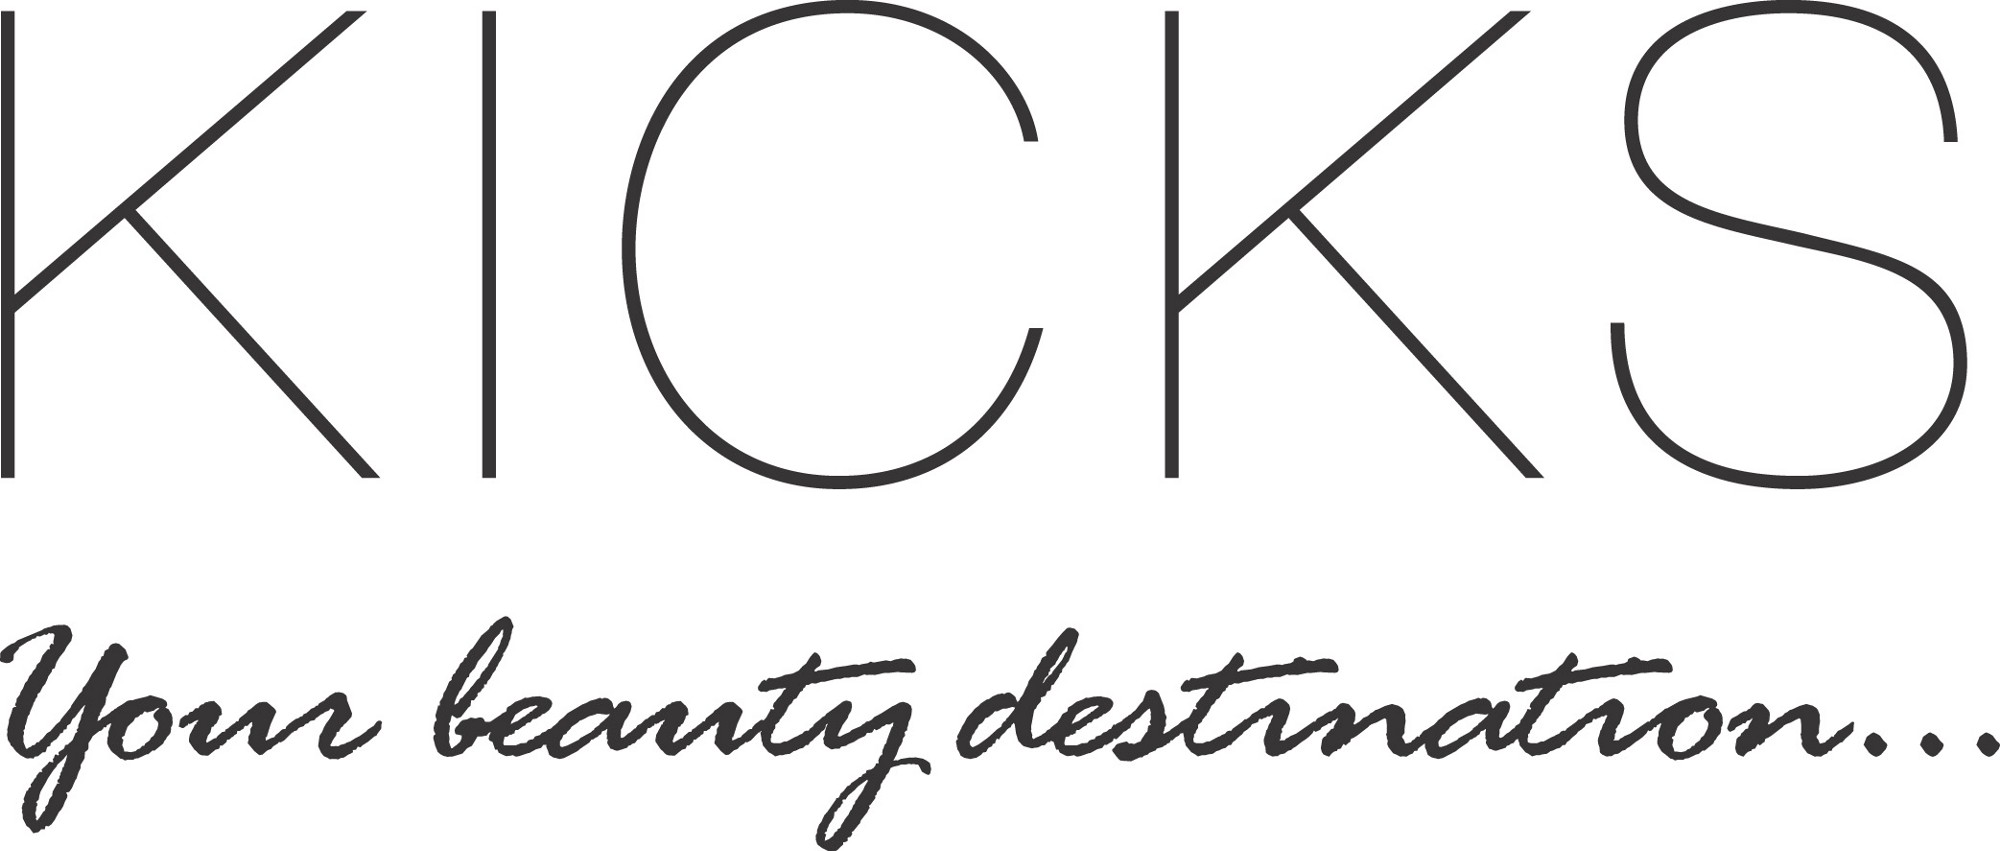 kicks - Progressive Safety receives nationwide breakthrough order from the business chain Kicks